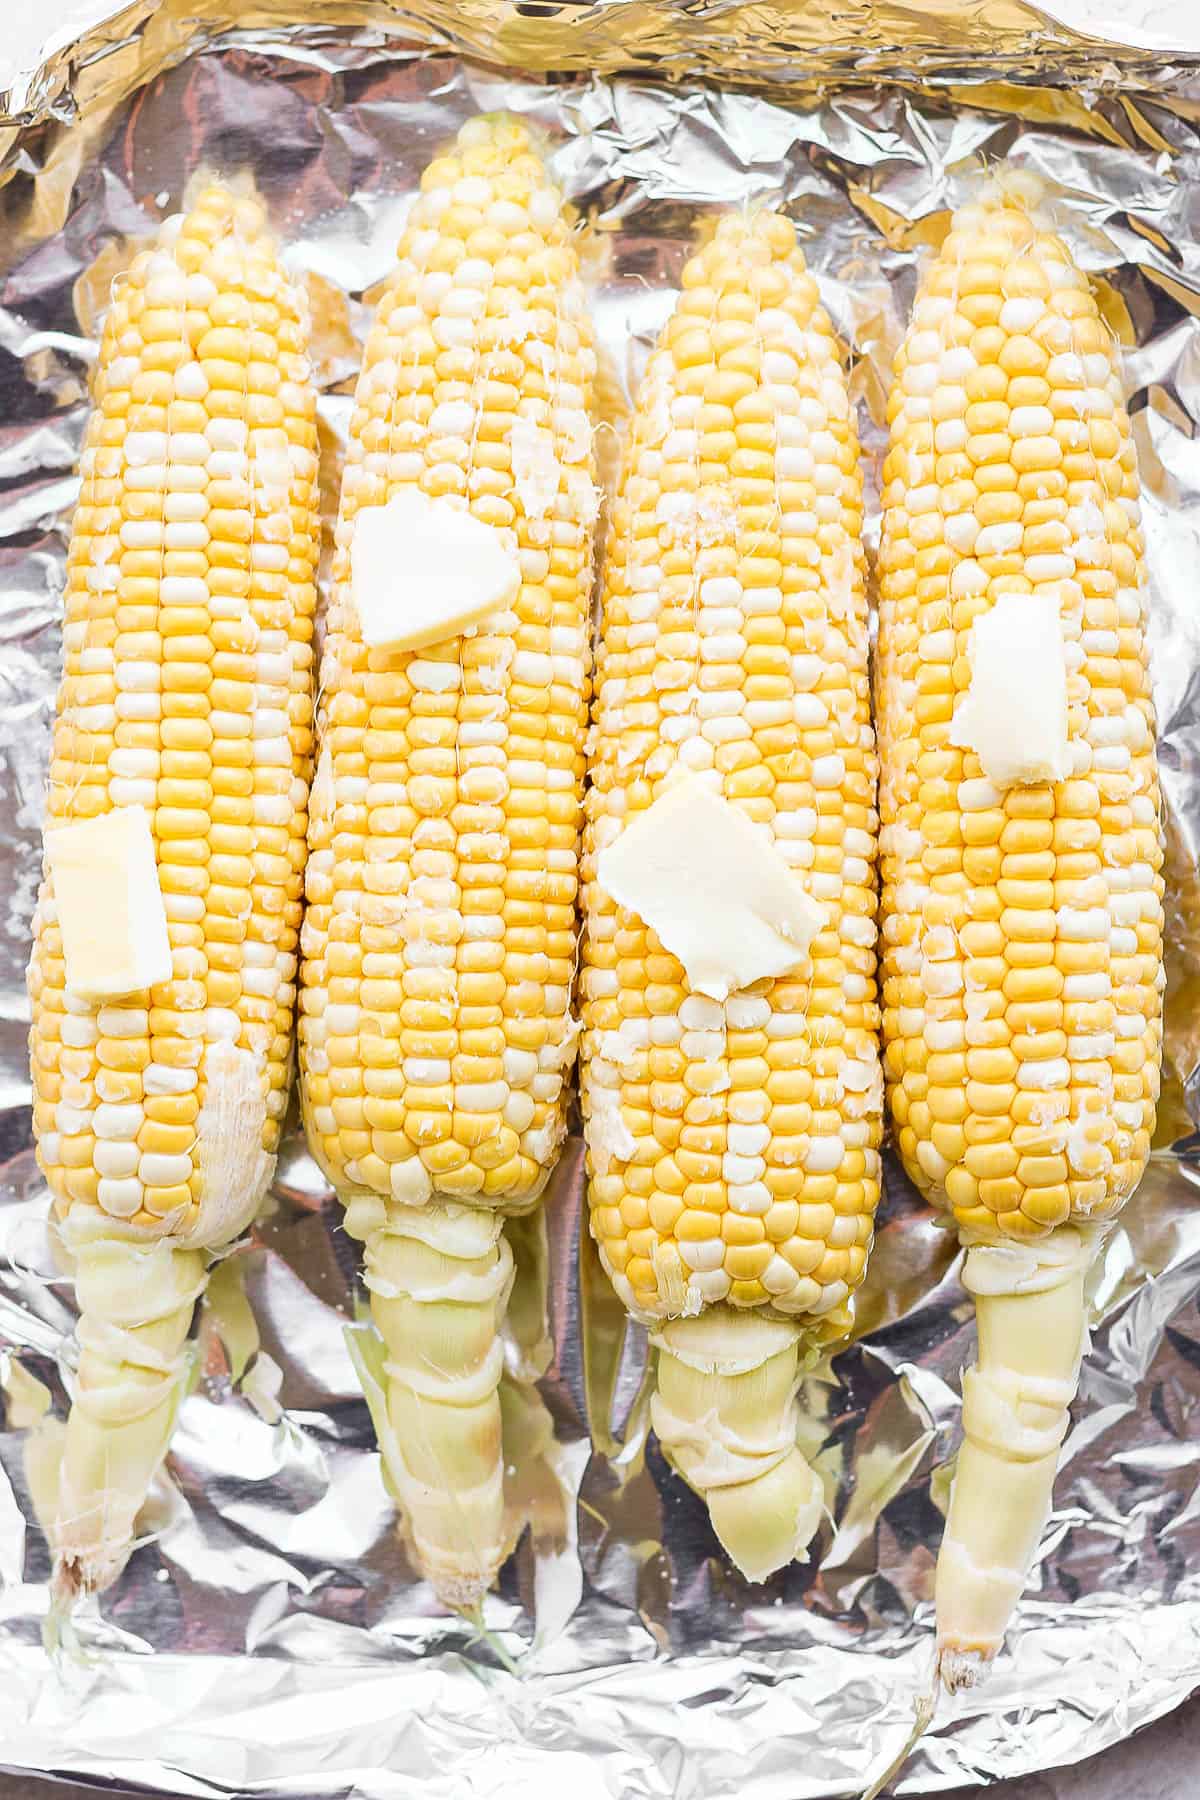 Four ears of corn on the cob laying on top of foil topped with pats of butter and kosher salt.